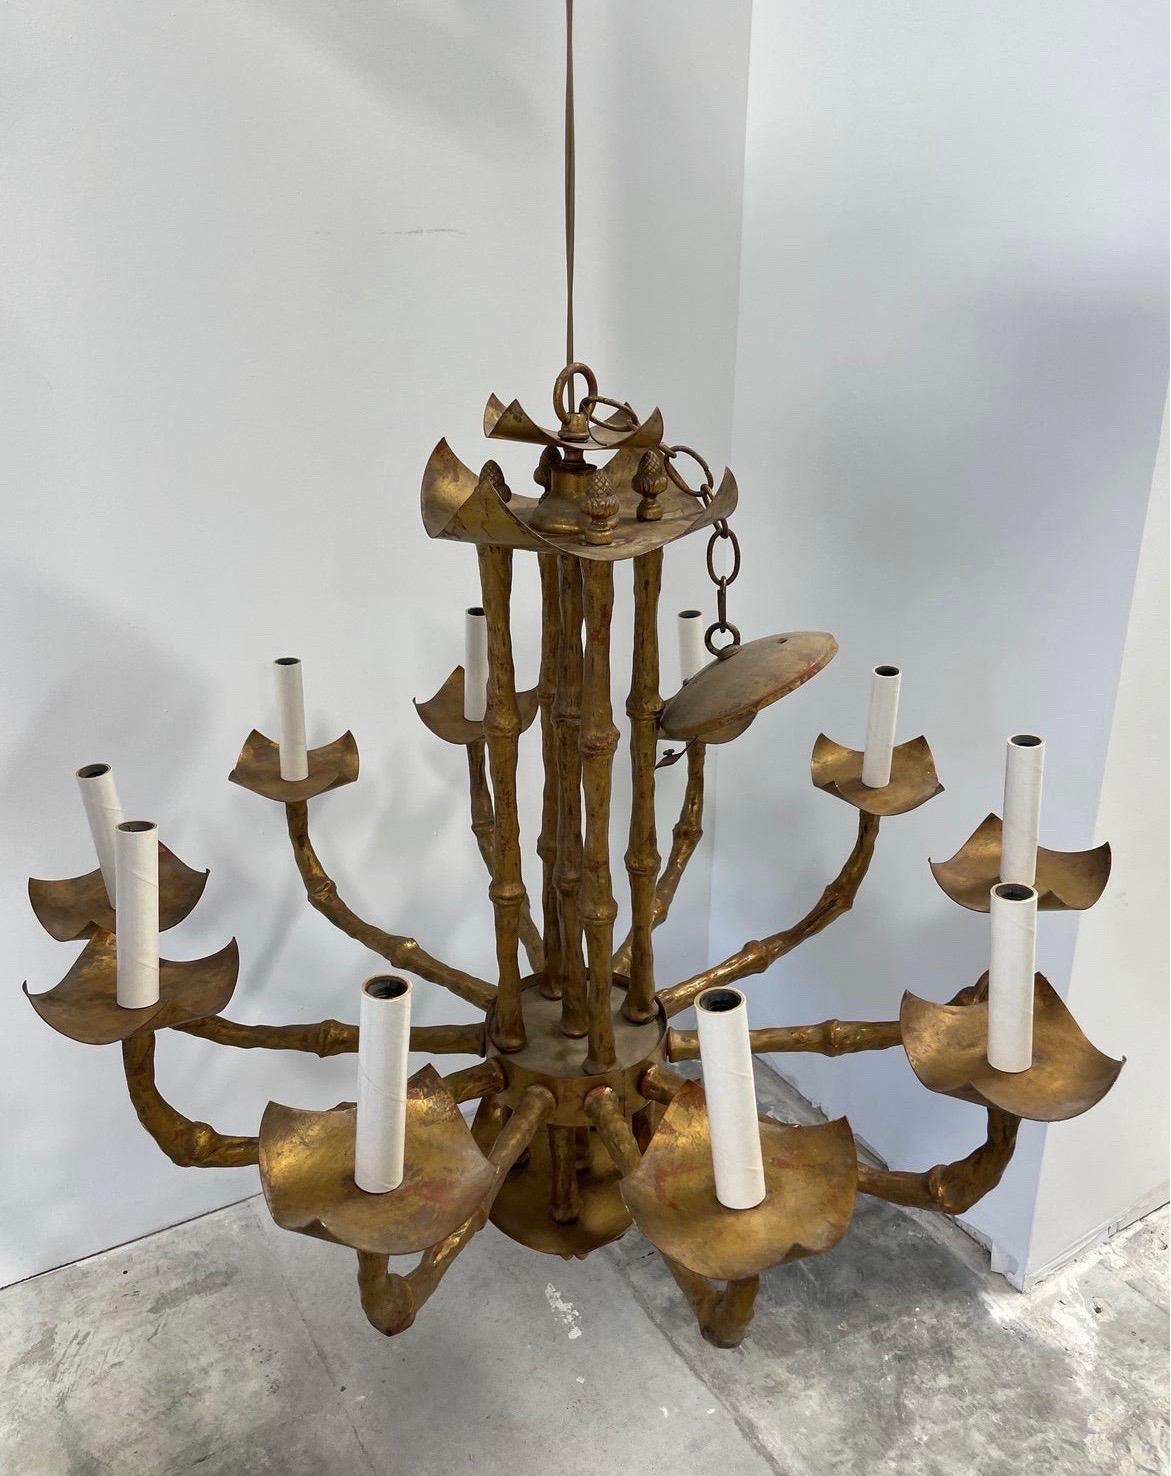 A great vintage Italian chandelier in faux bamboo chinoiserie form, 10 light, pagoda style and gilded. Fully operational, Cap measures 5”.